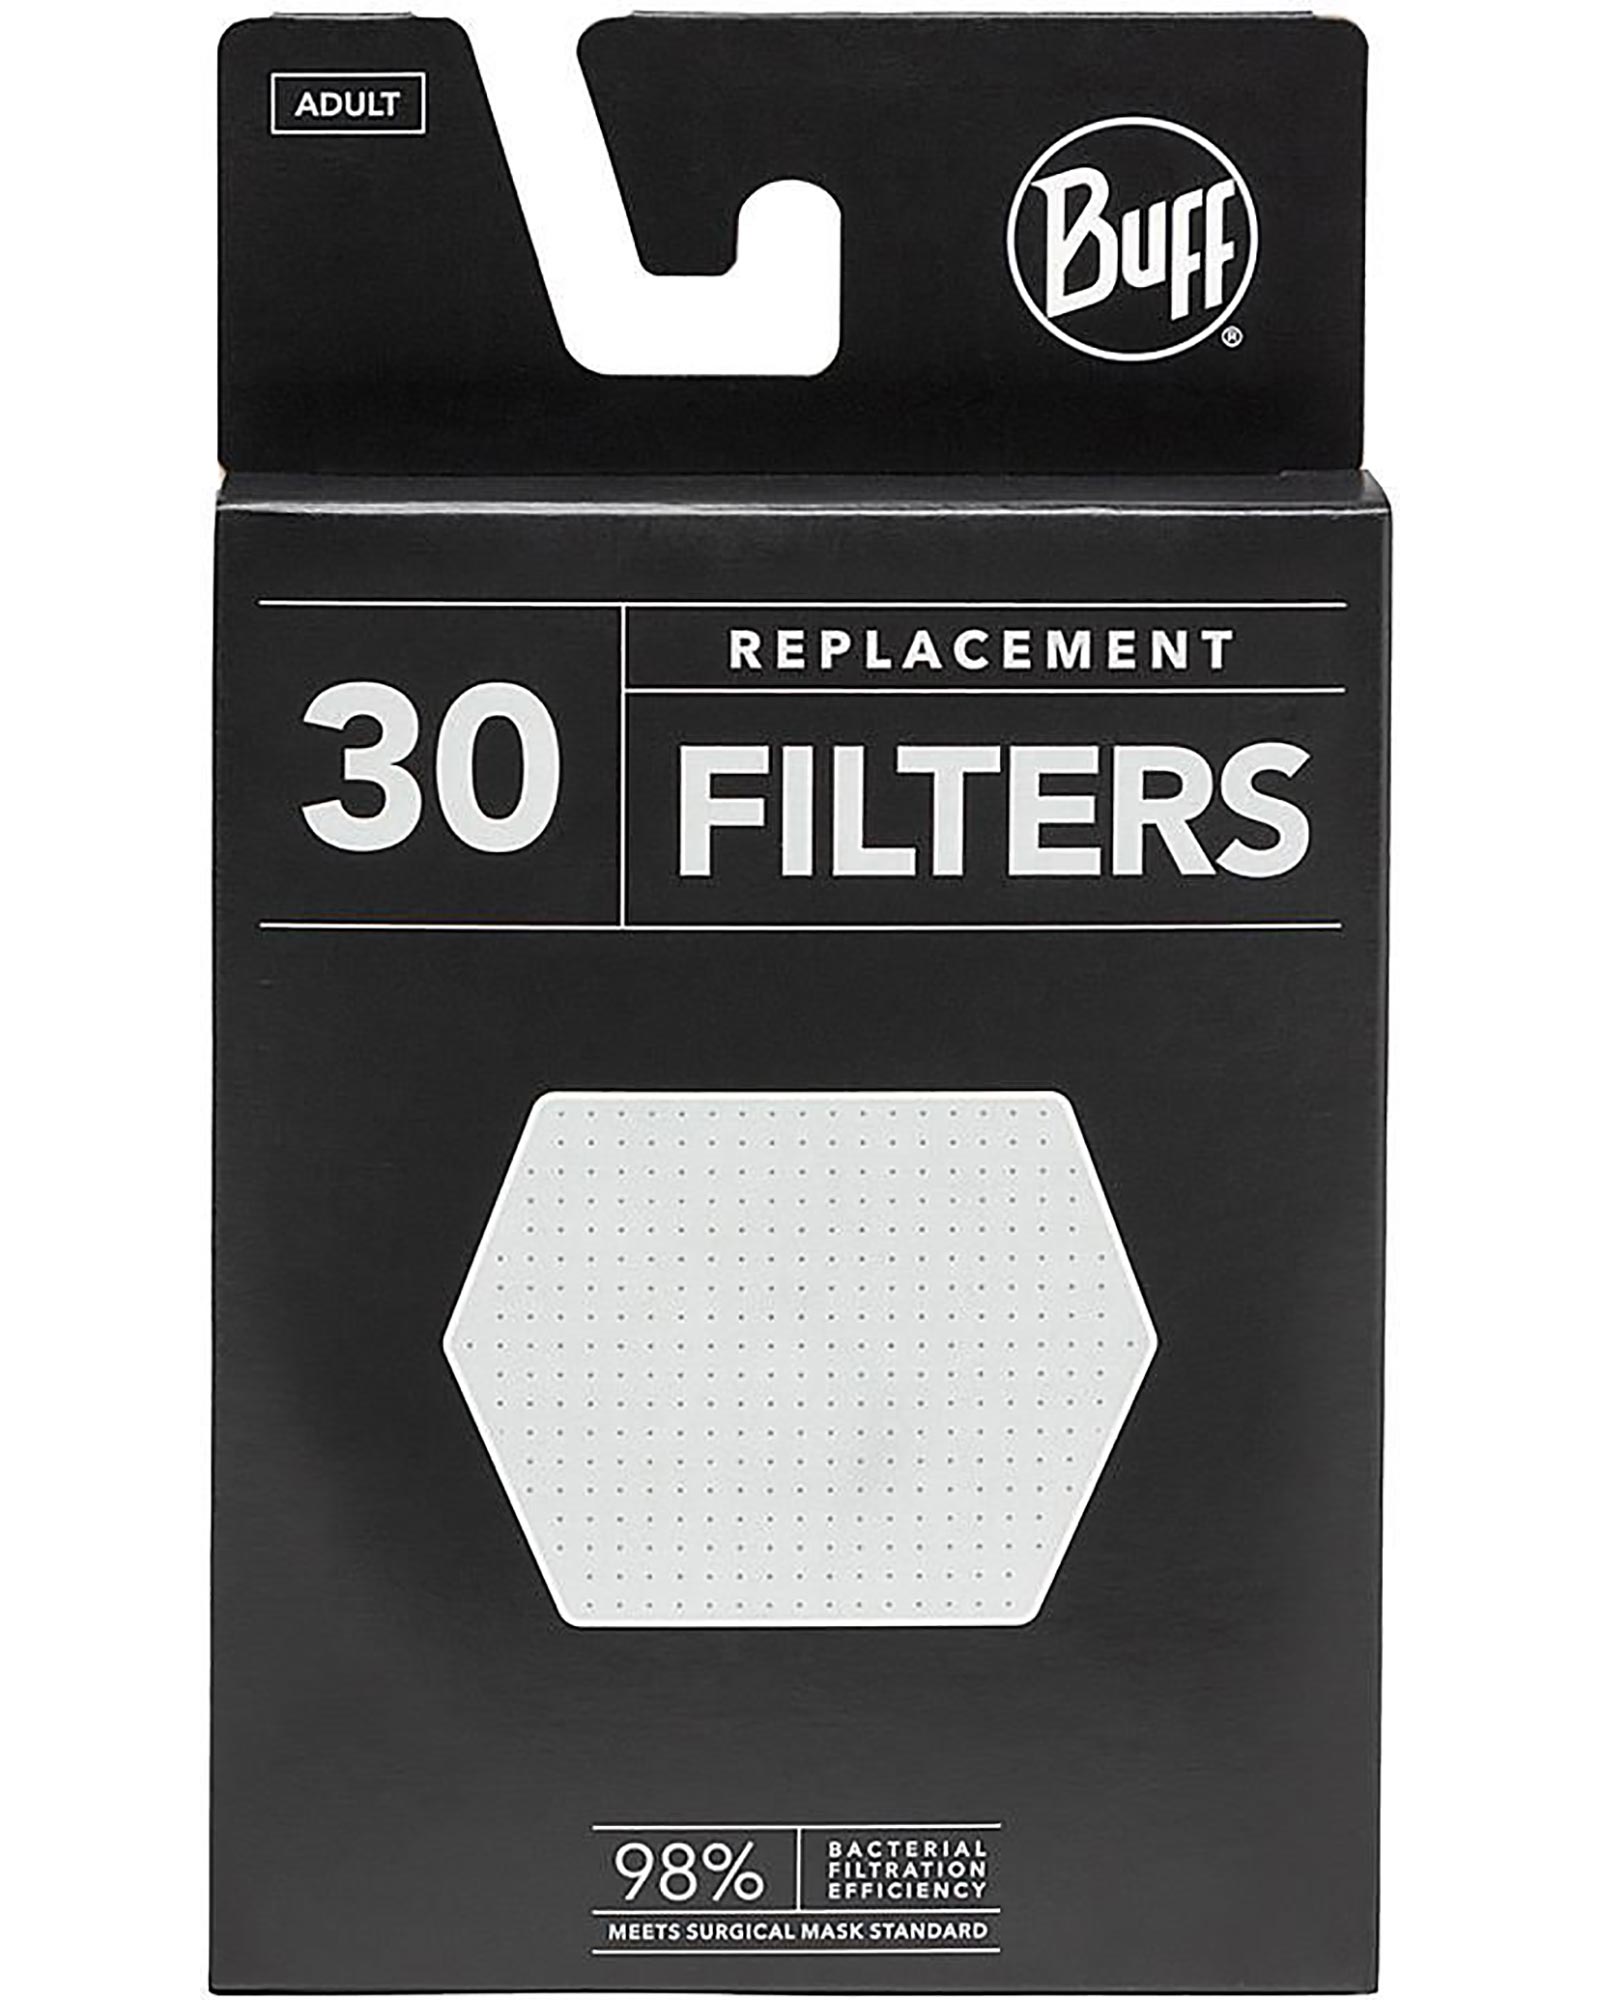 Buff 30 Replacement Filters